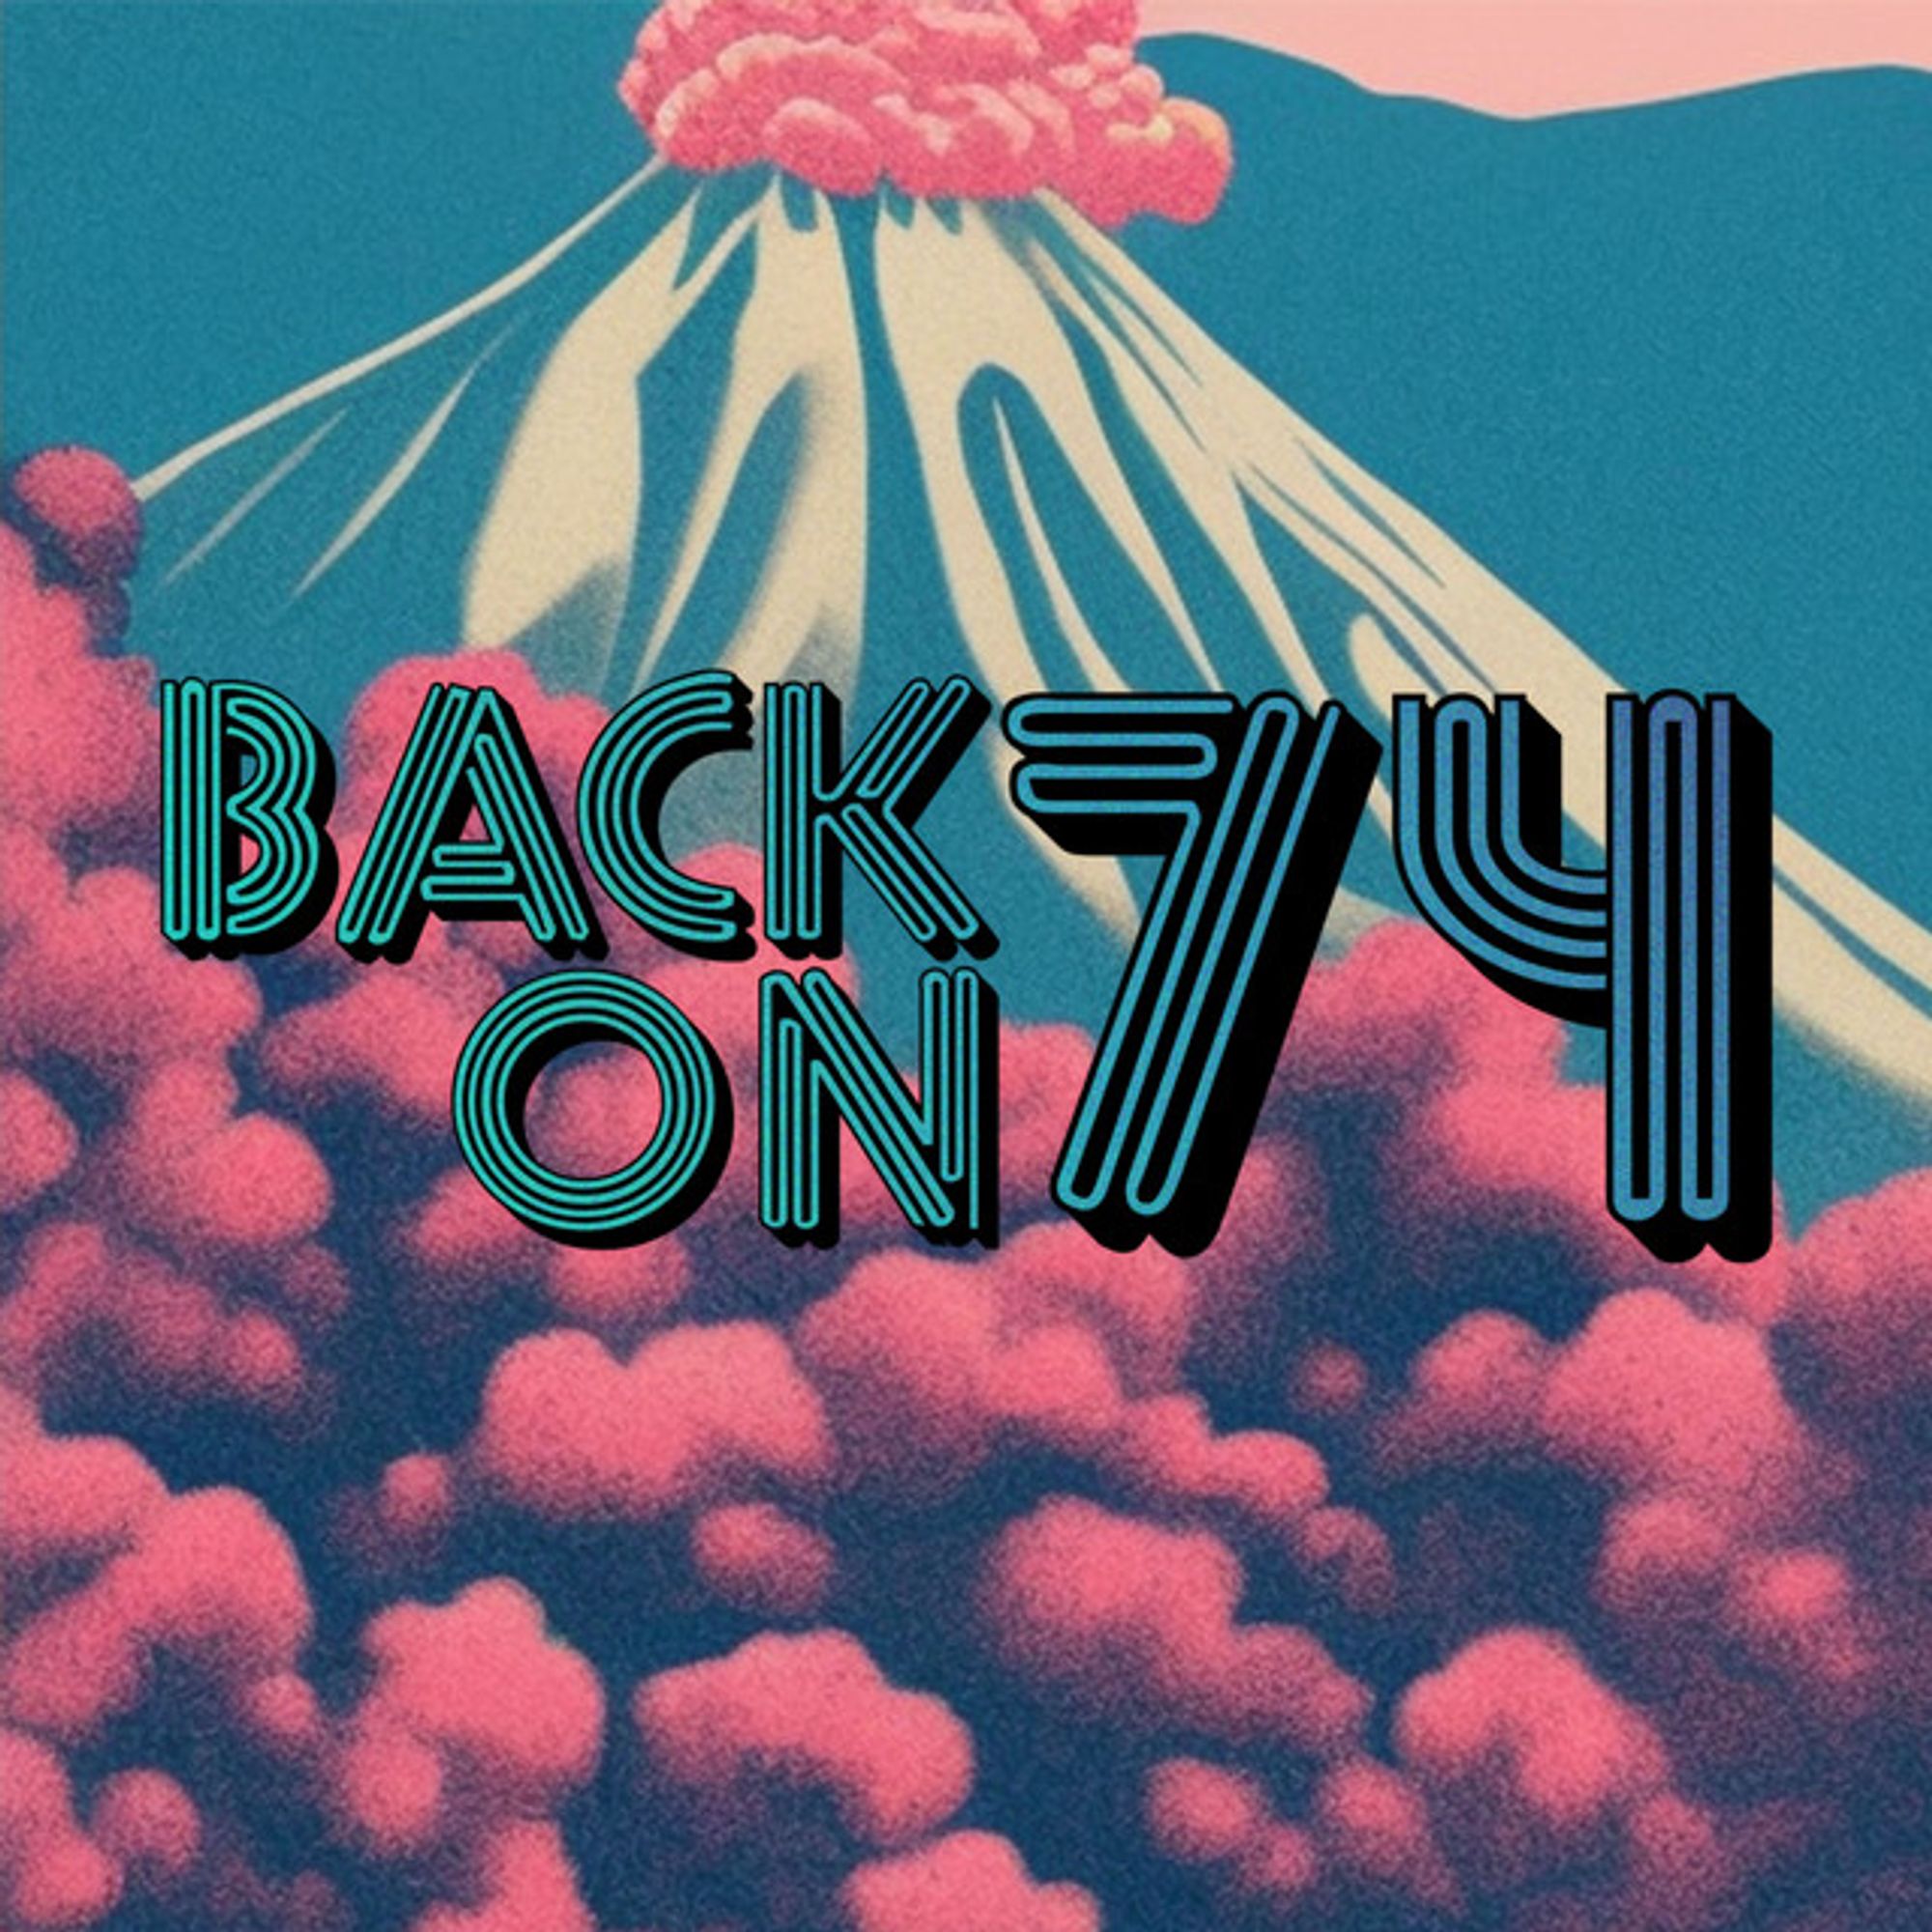 Back On 74 - Full Crate Remix